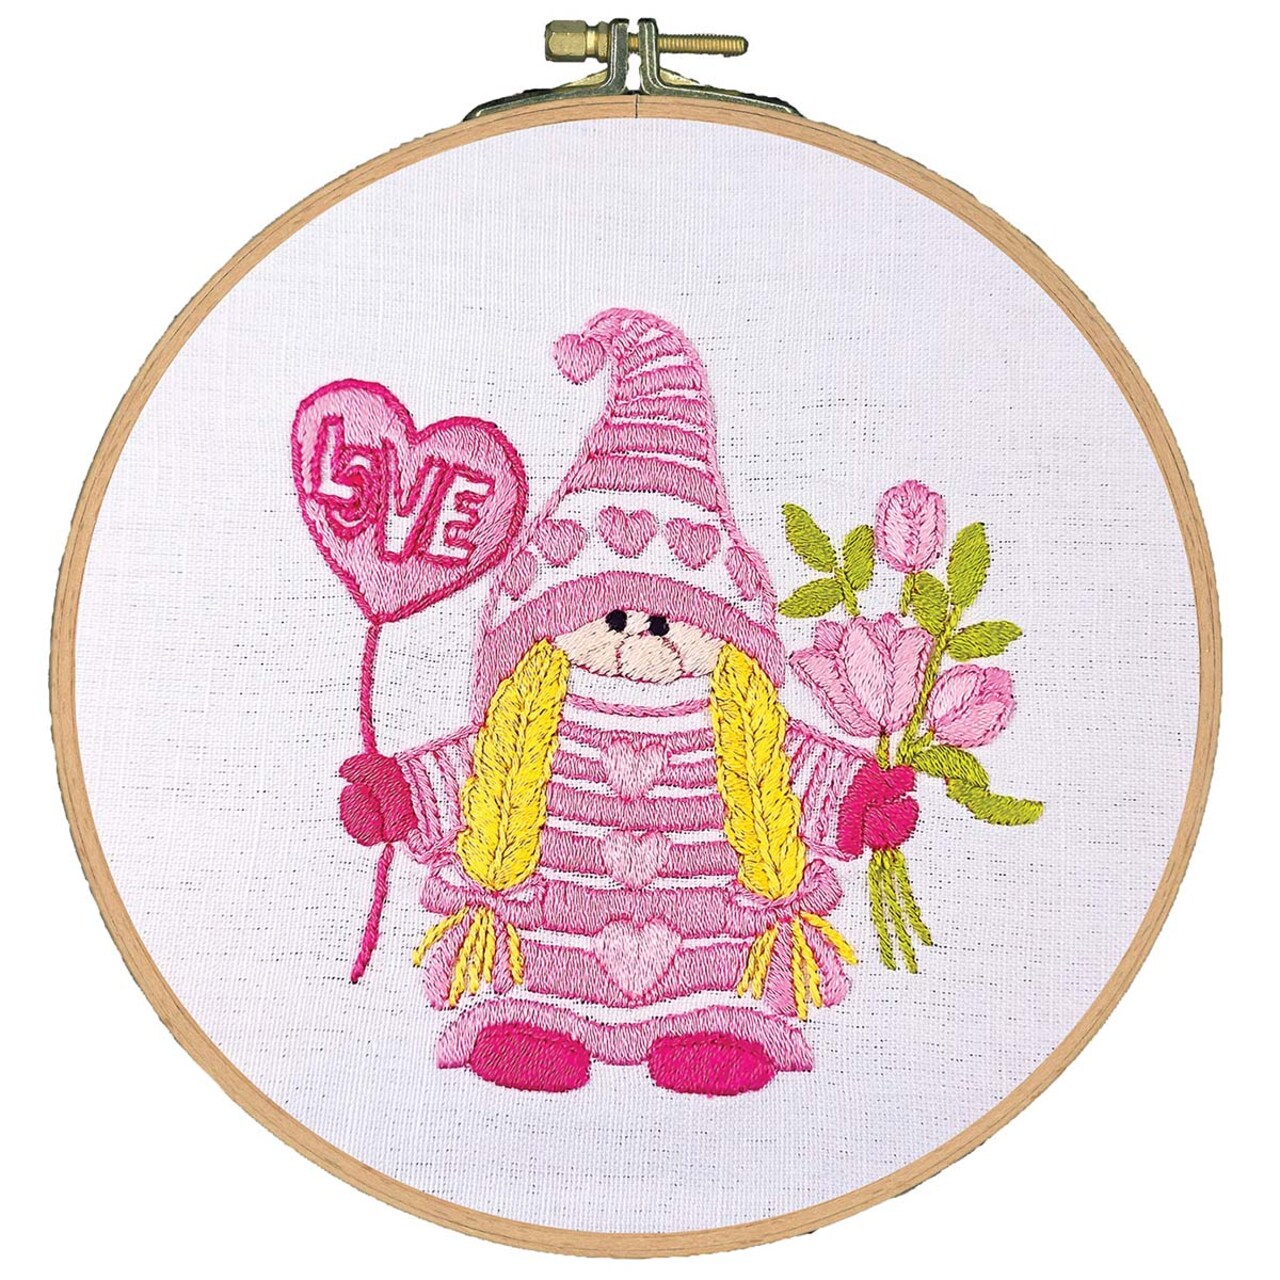 Craftways Pink Gnome Love Balloon Hoop Stamped Embroidery Kit